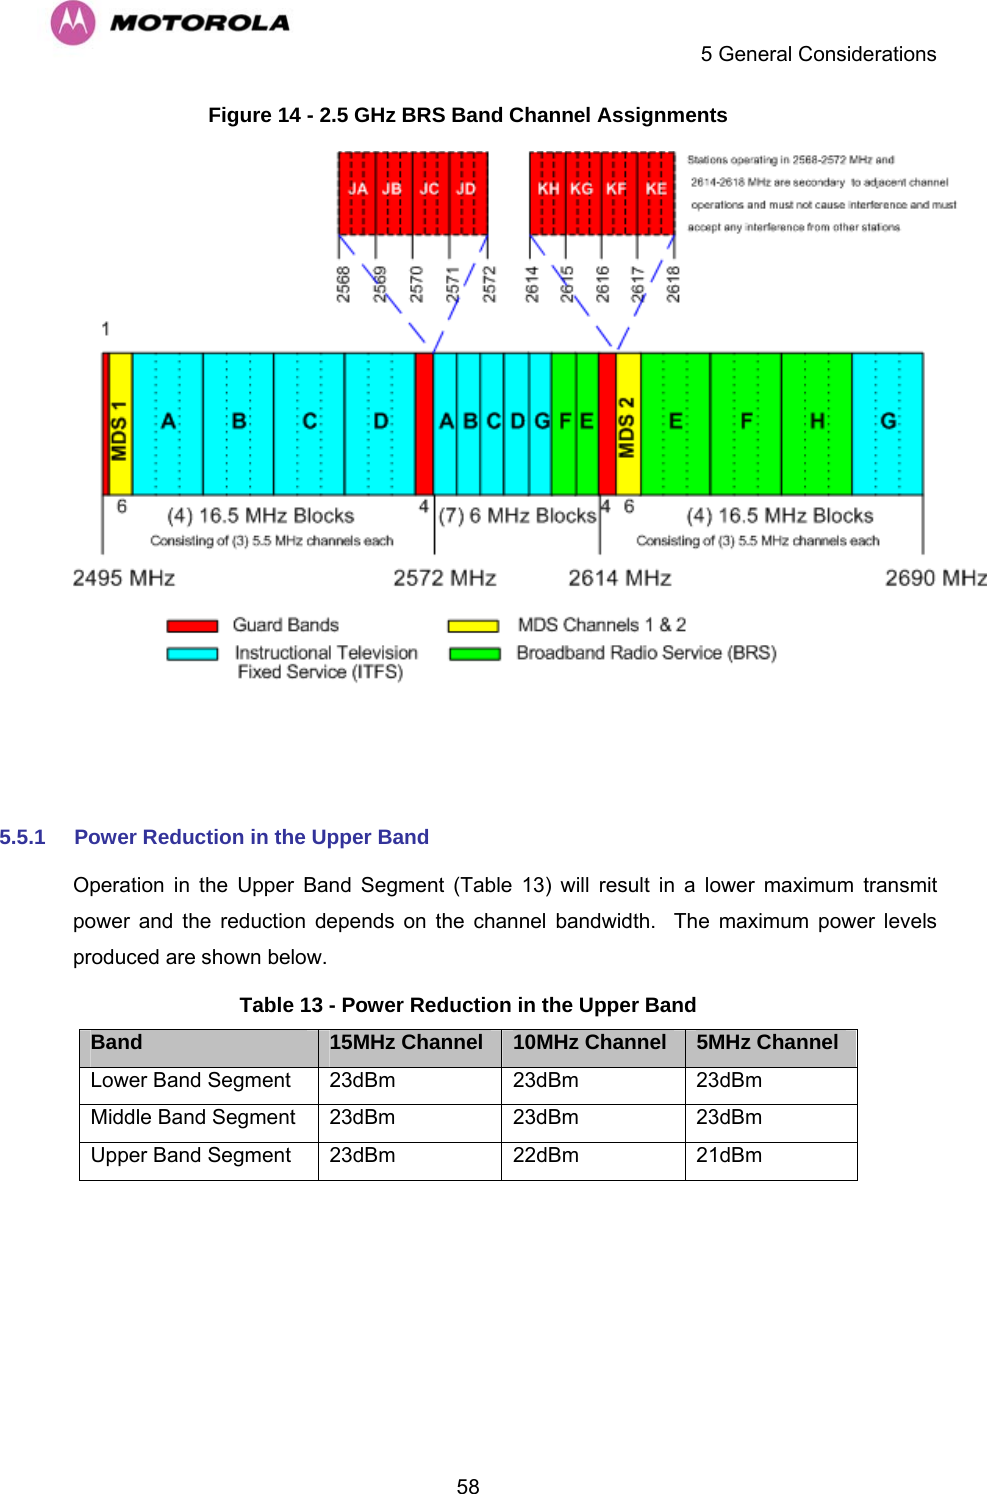    5 General Considerations  58Figure 14 - 2.5 GHz BRS Band Channel Assignments   5.5.1  Power Reduction in the Upper Band Operation in the Upper Band Segment (Table 13) will result in a lower maximum transmit power and the reduction depends on the channel bandwidth.  The maximum power levels produced are shown below. Table 13 - Power Reduction in the Upper Band Band  15MHz Channel  10MHz Channel  5MHz Channel Lower Band Segment  23dBm  23dBm  23dBm Middle Band Segment  23dBm  23dBm  23dBm Upper Band Segment  23dBm  22dBm  21dBm 